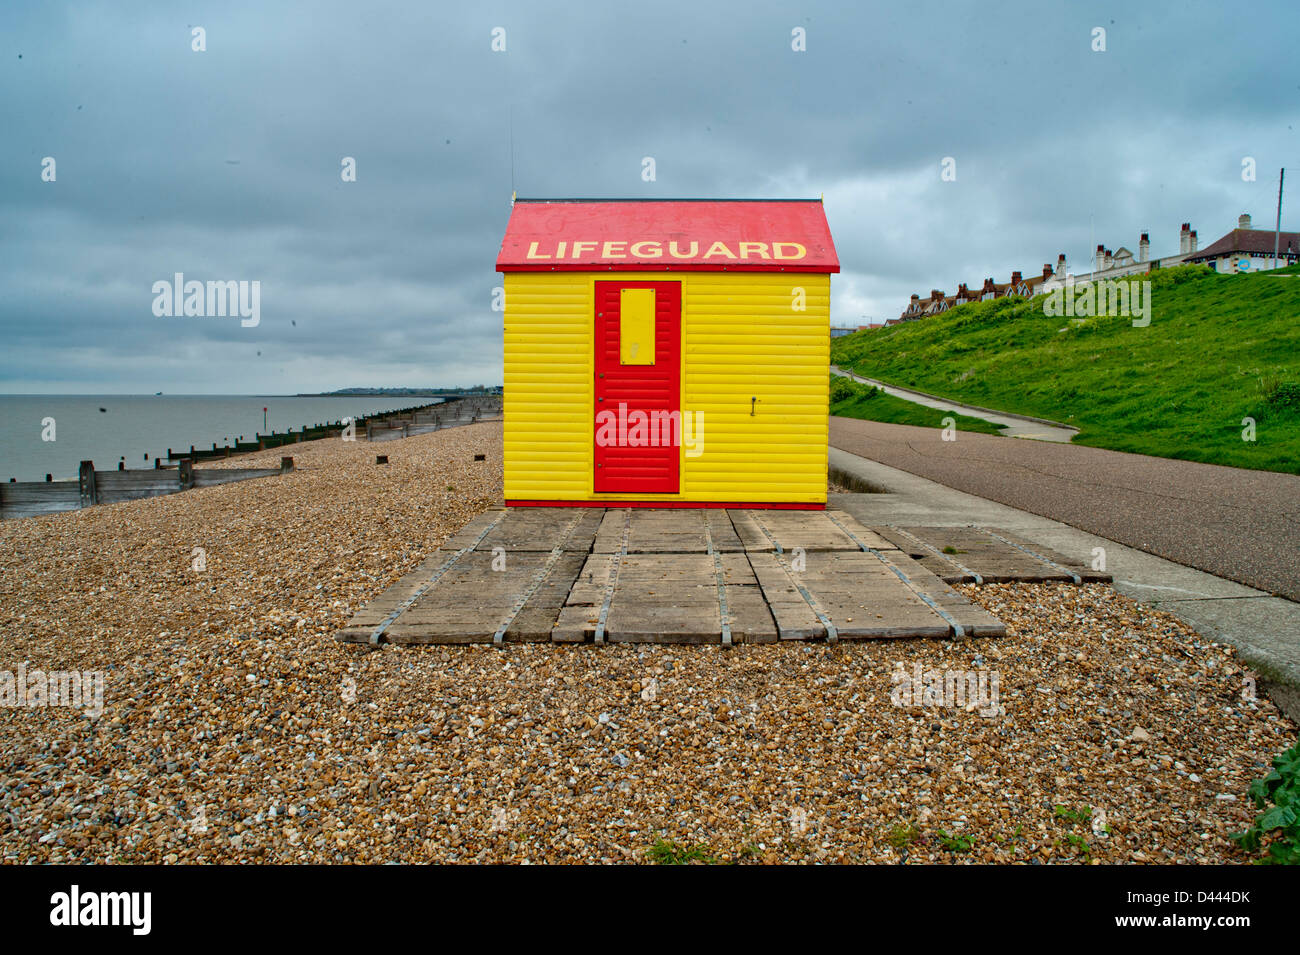 Beach hut at the South East coast in Kent, Whitstable Stock Photo